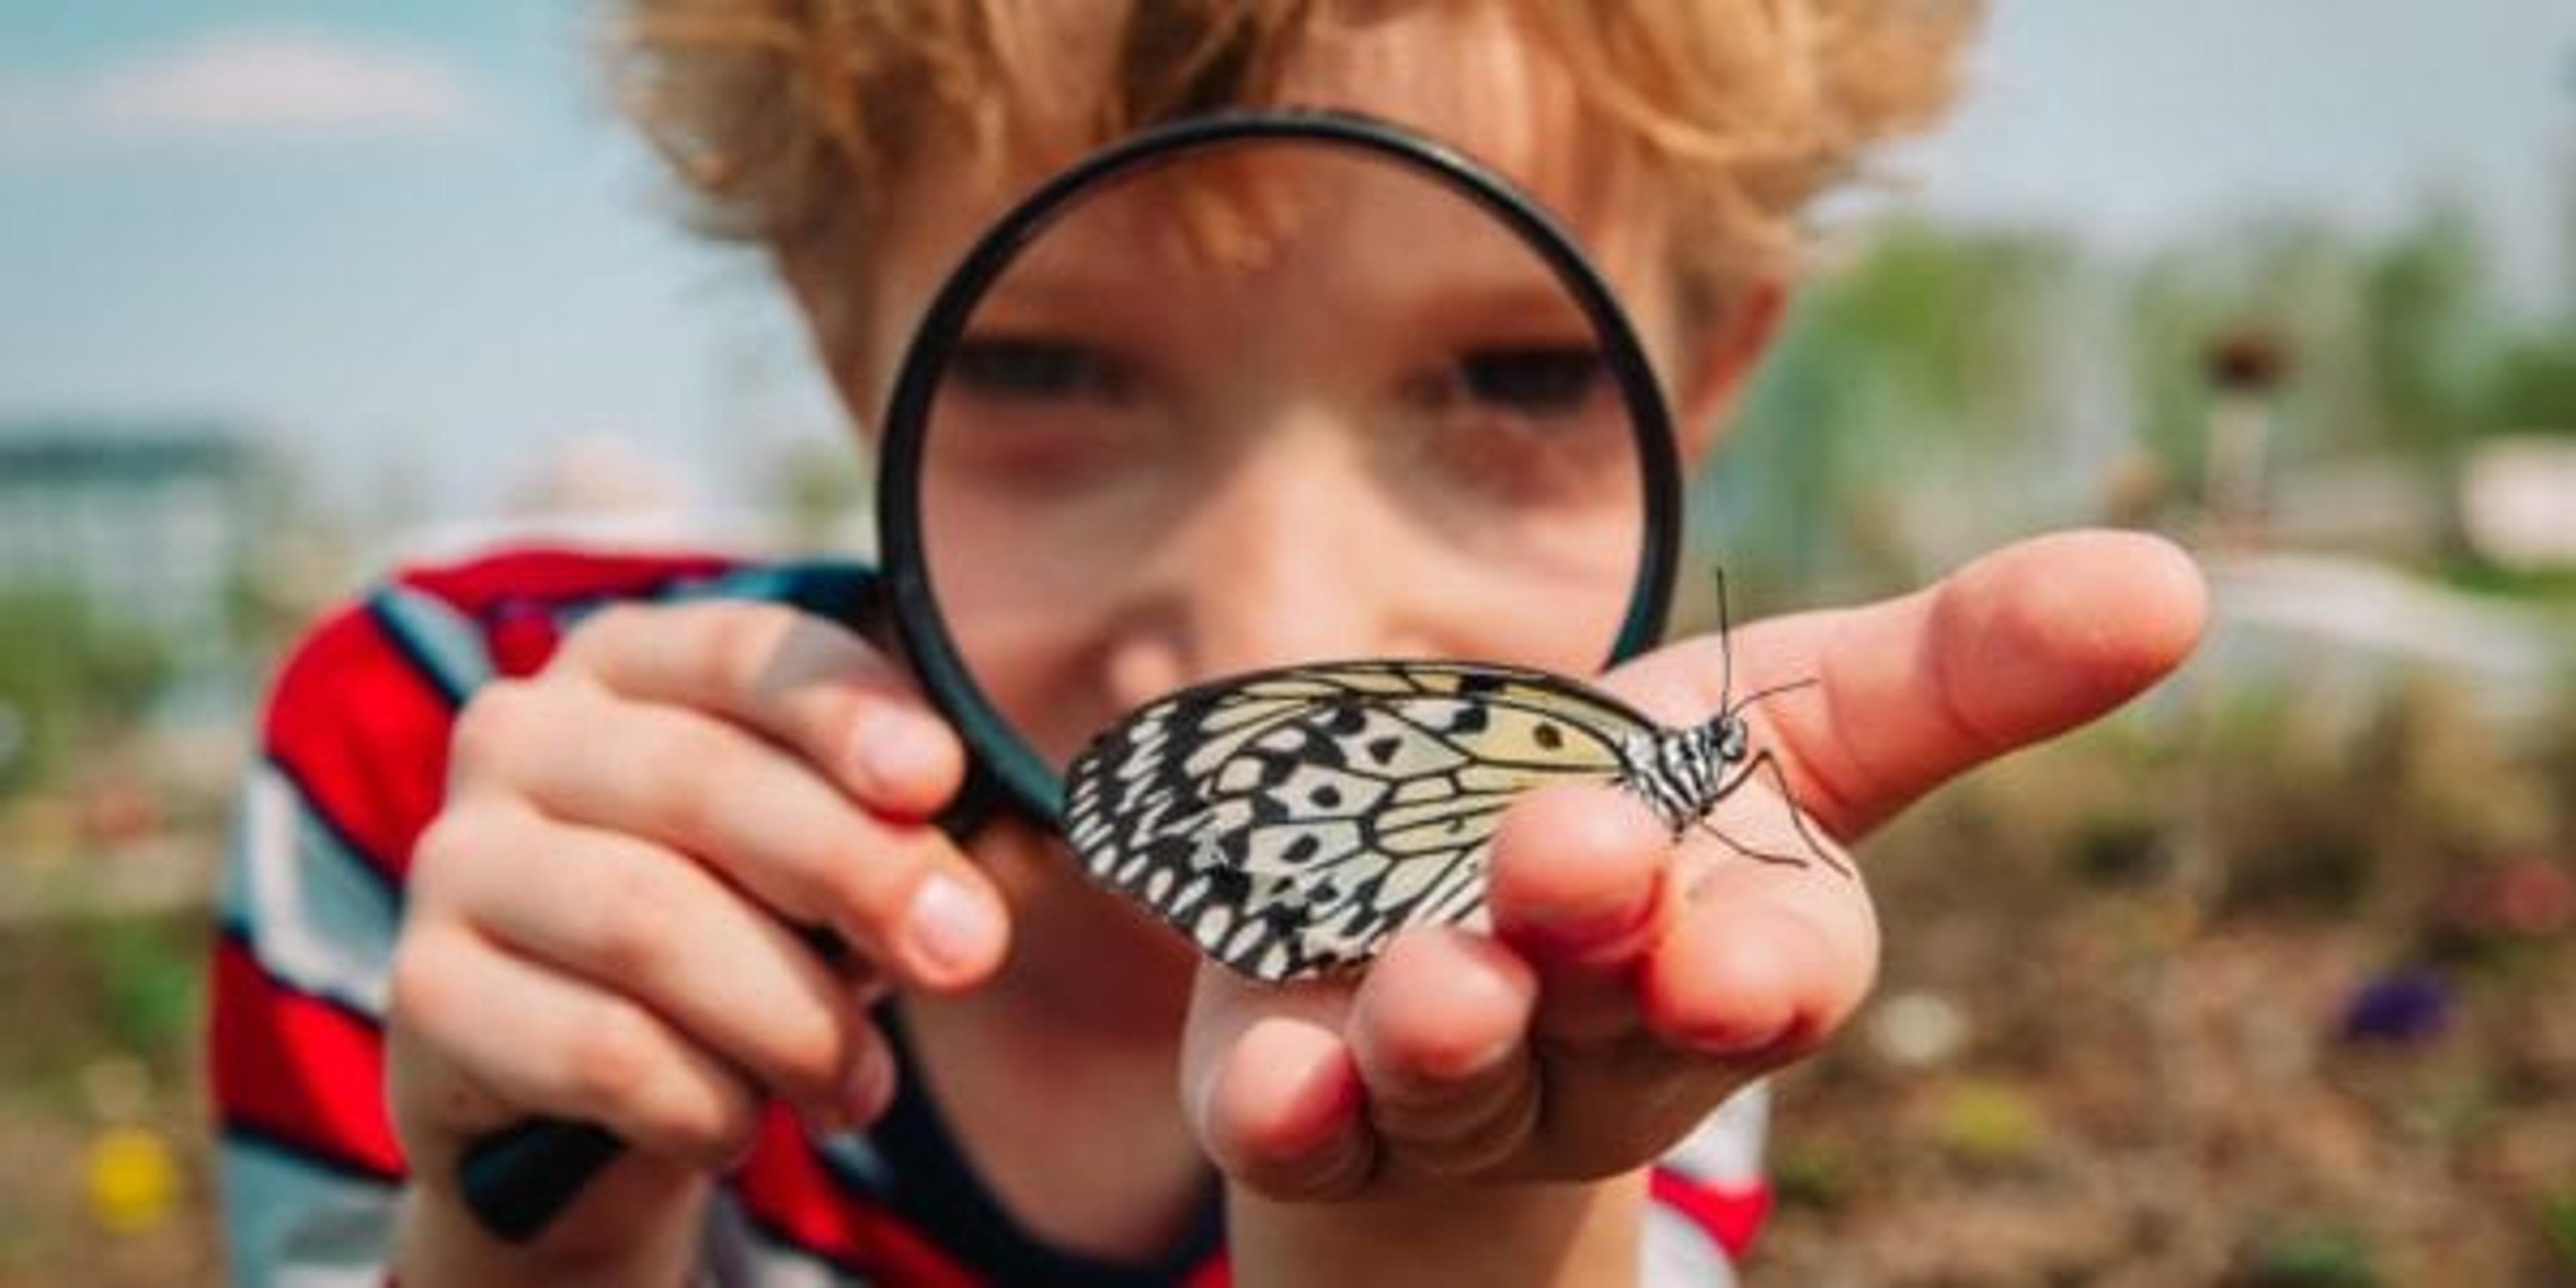 Small boy looking at butterfly through magnifying glass